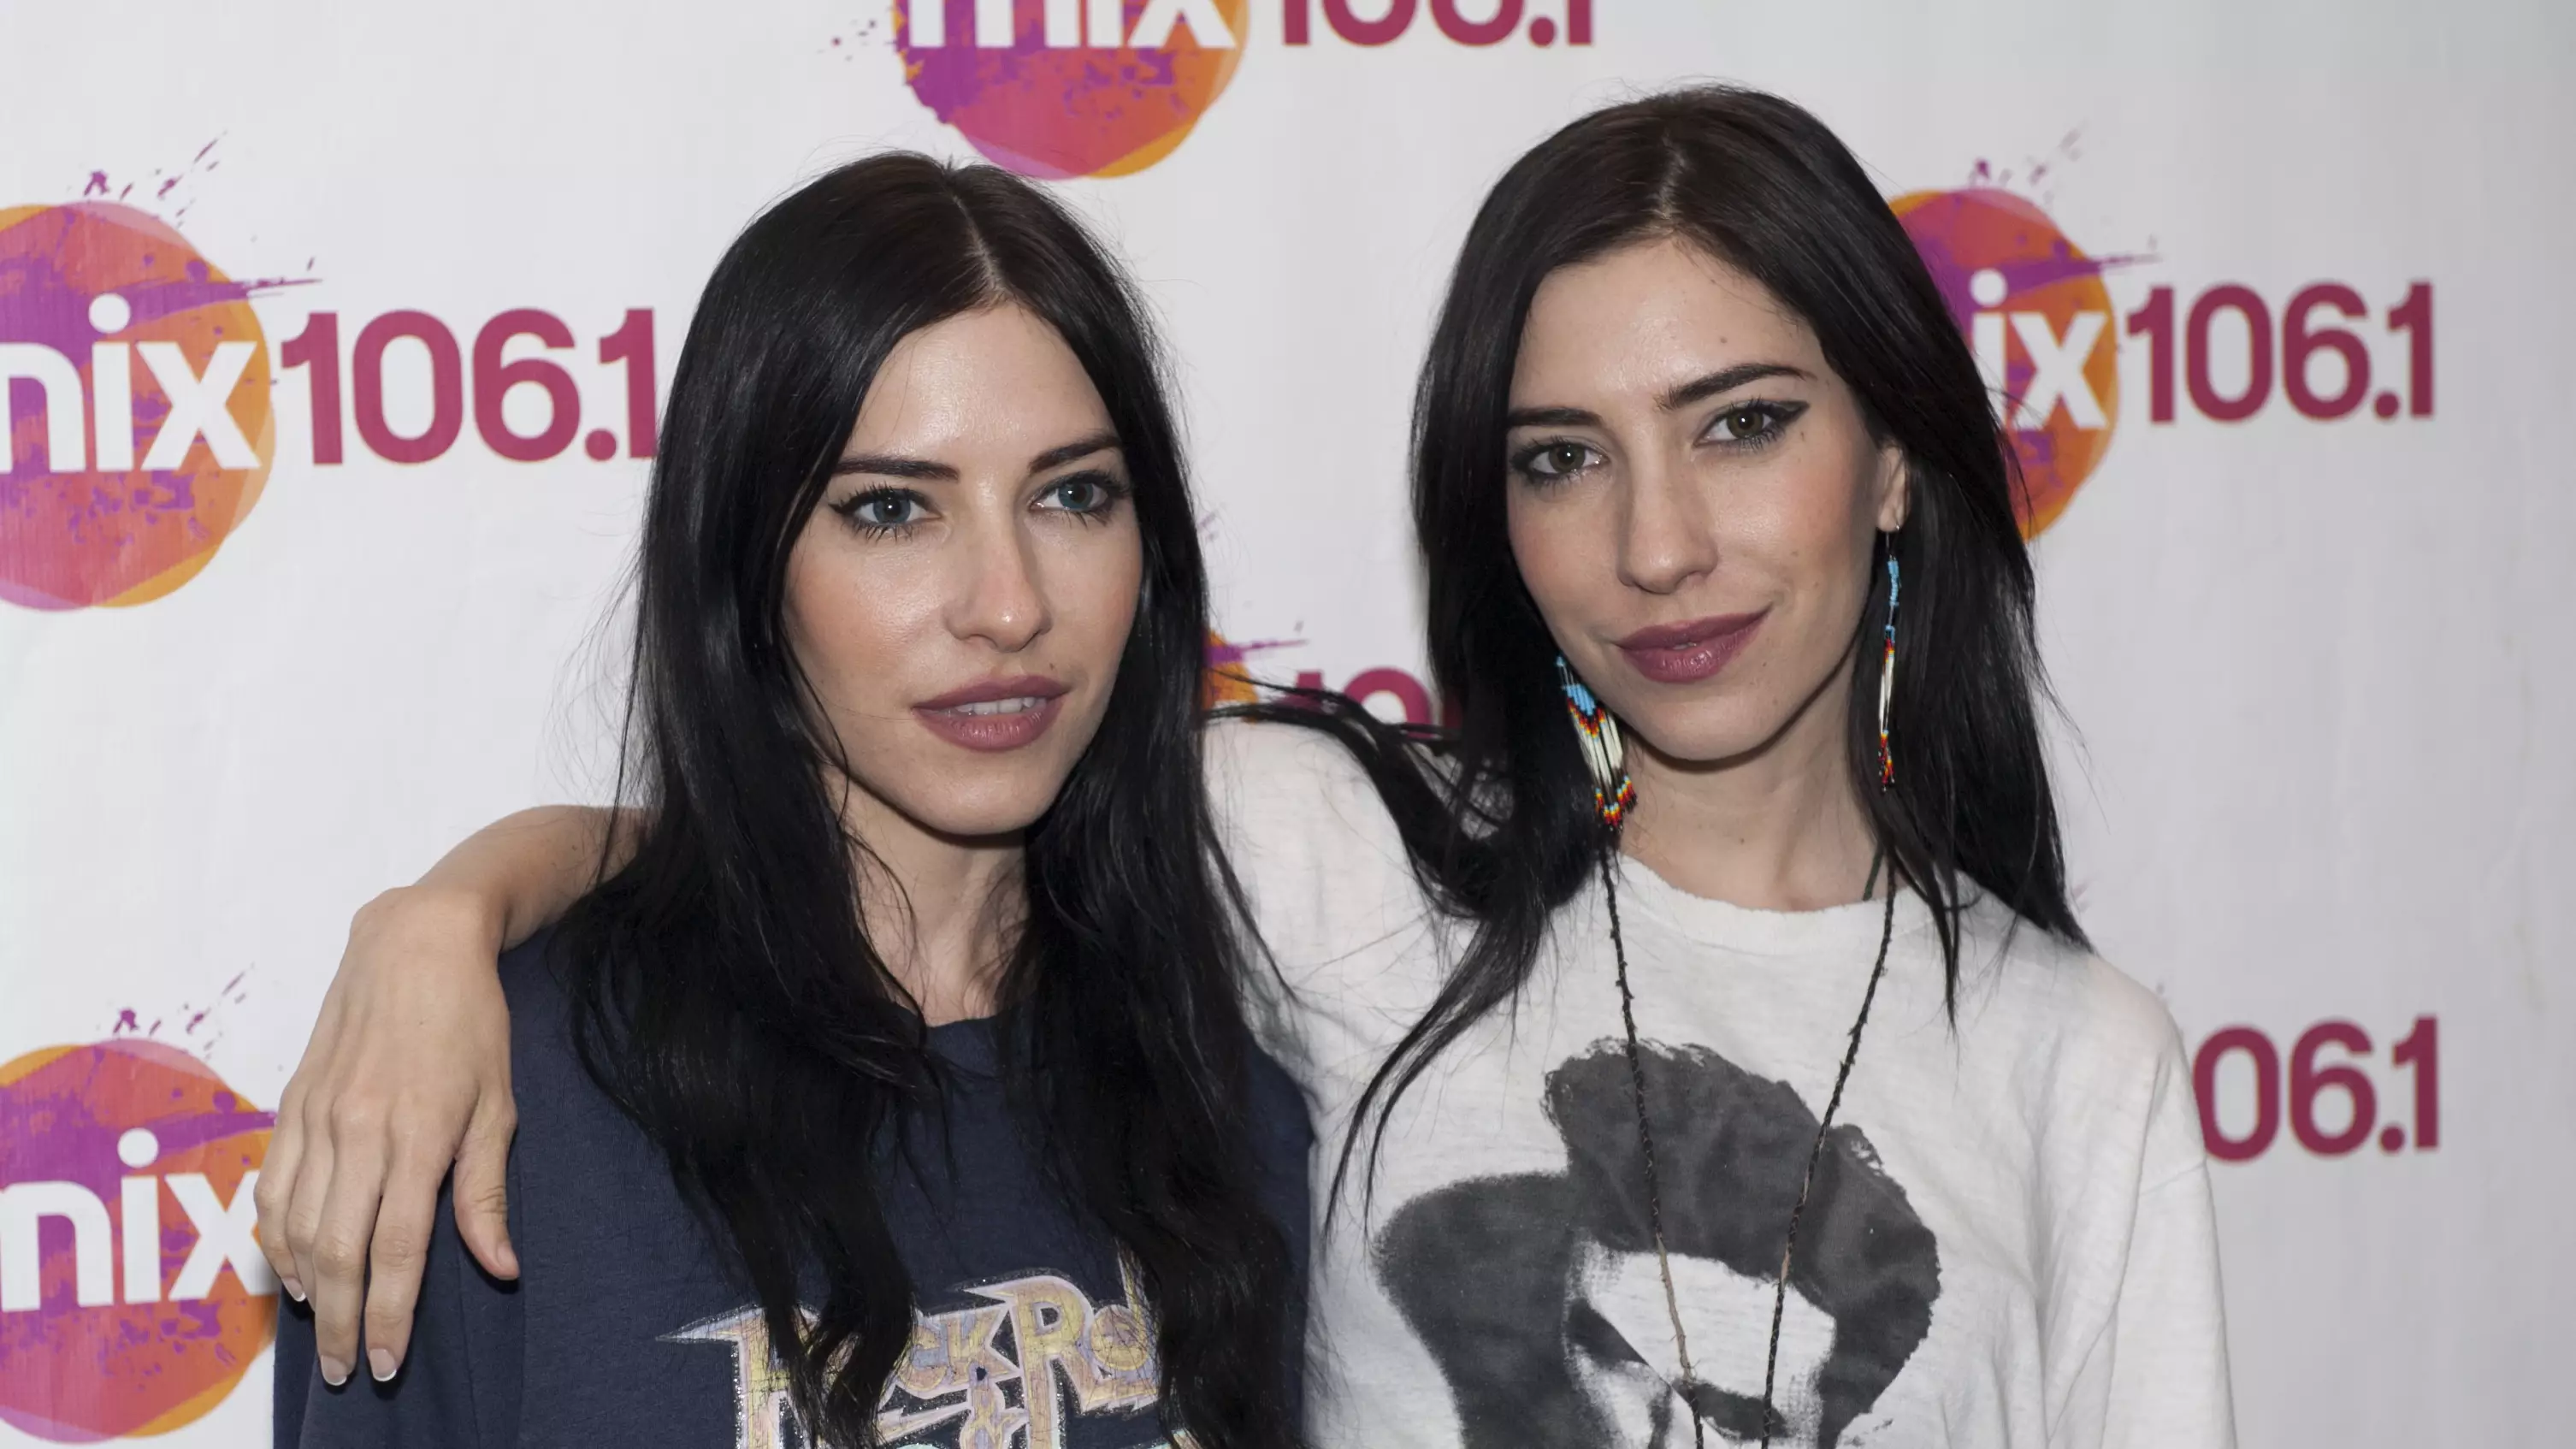 The Veronicas, 'Cash Me Ousside' Girl And Darude Announced For Groovin In The Moo Festival